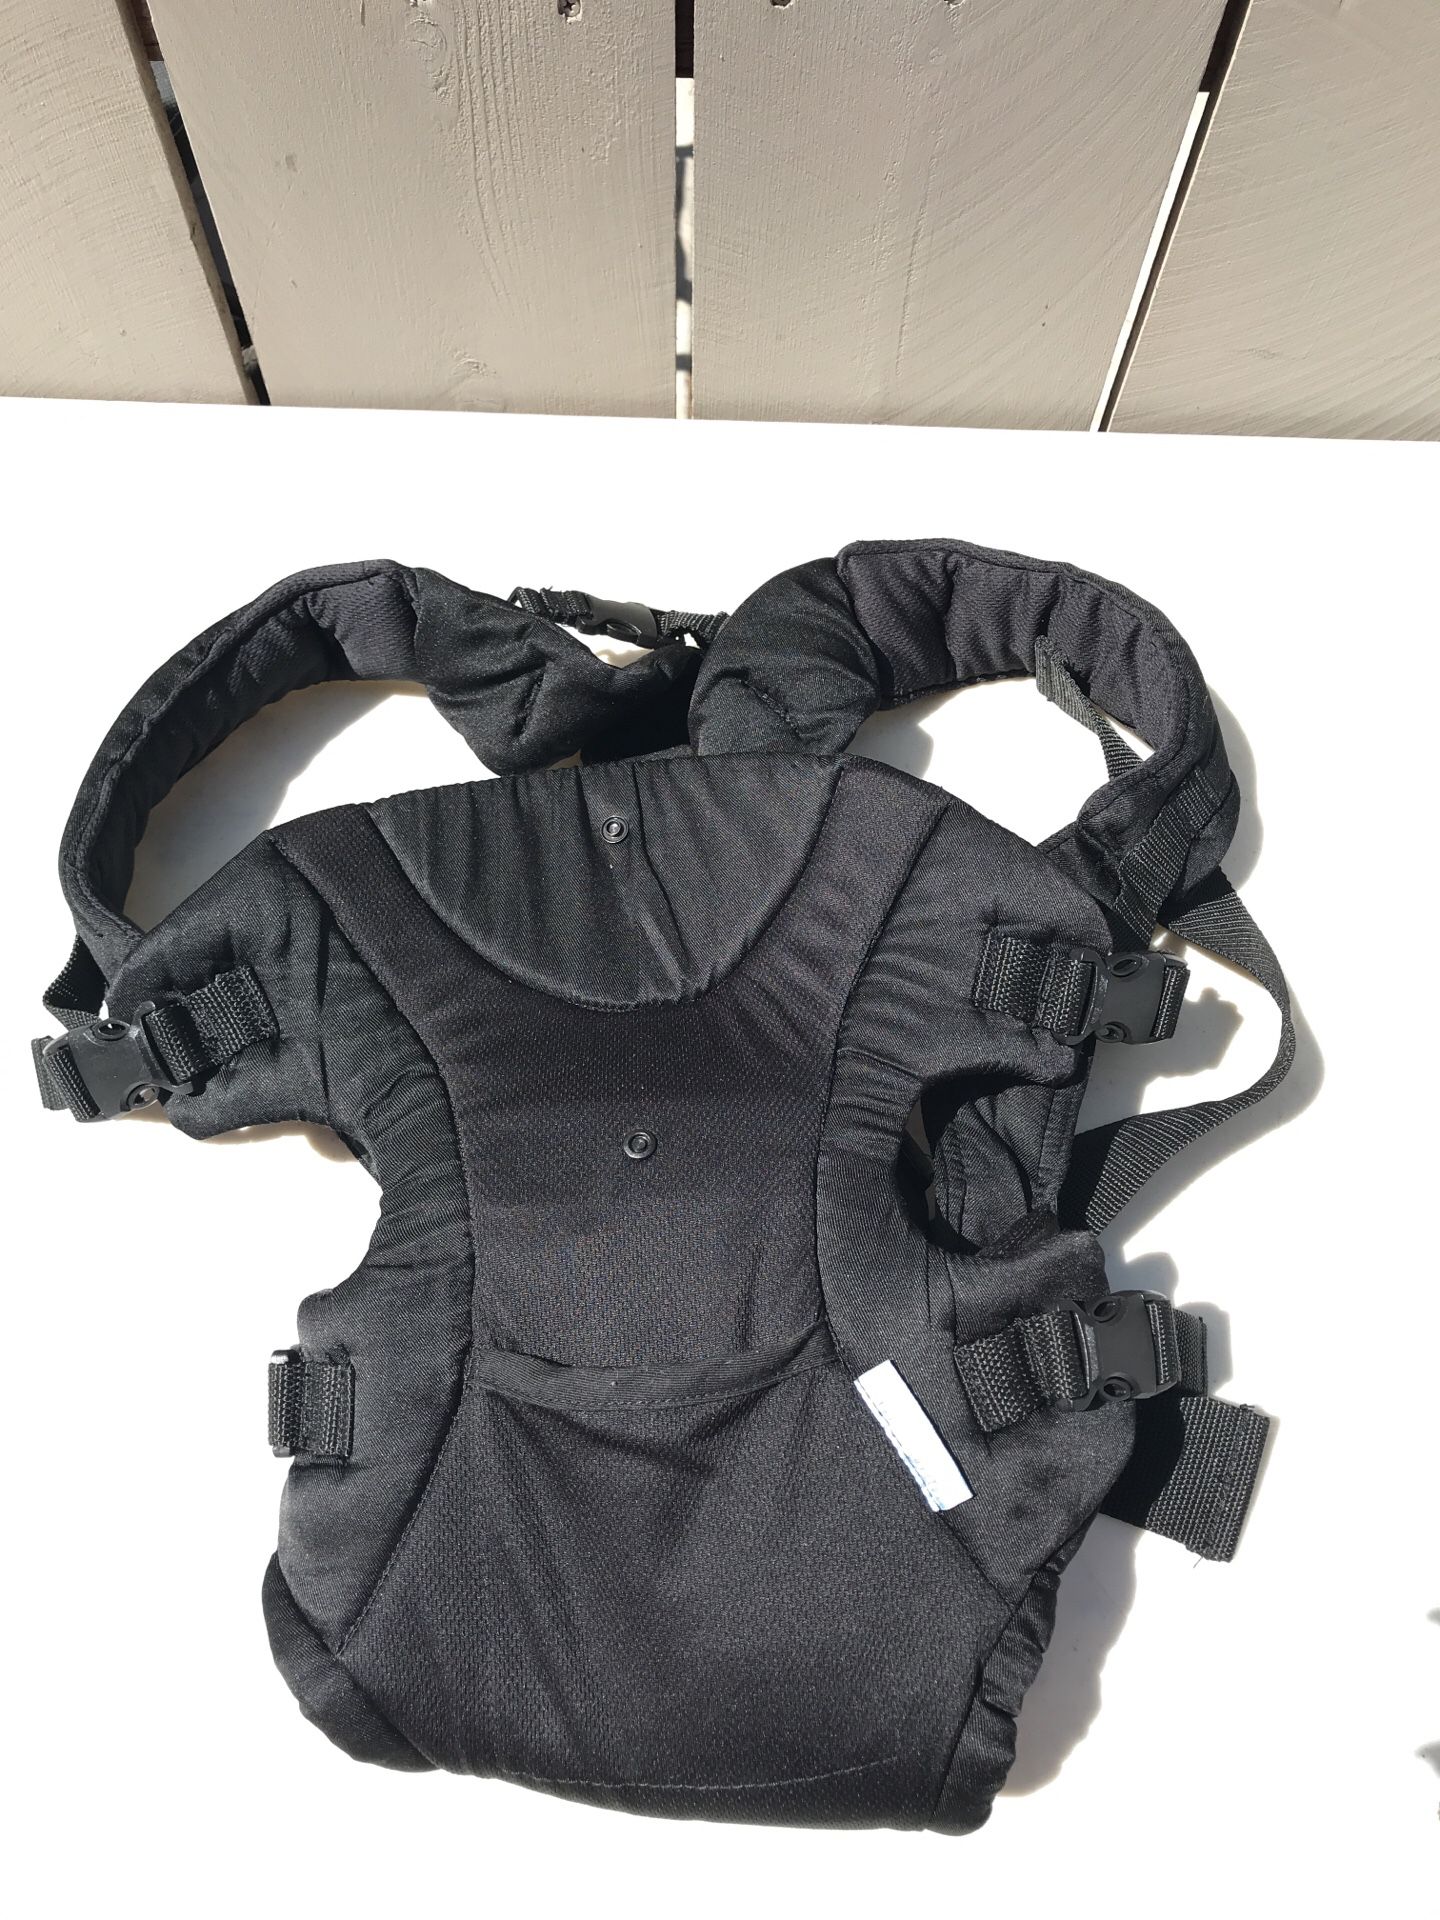 Baby Infantino Carrier